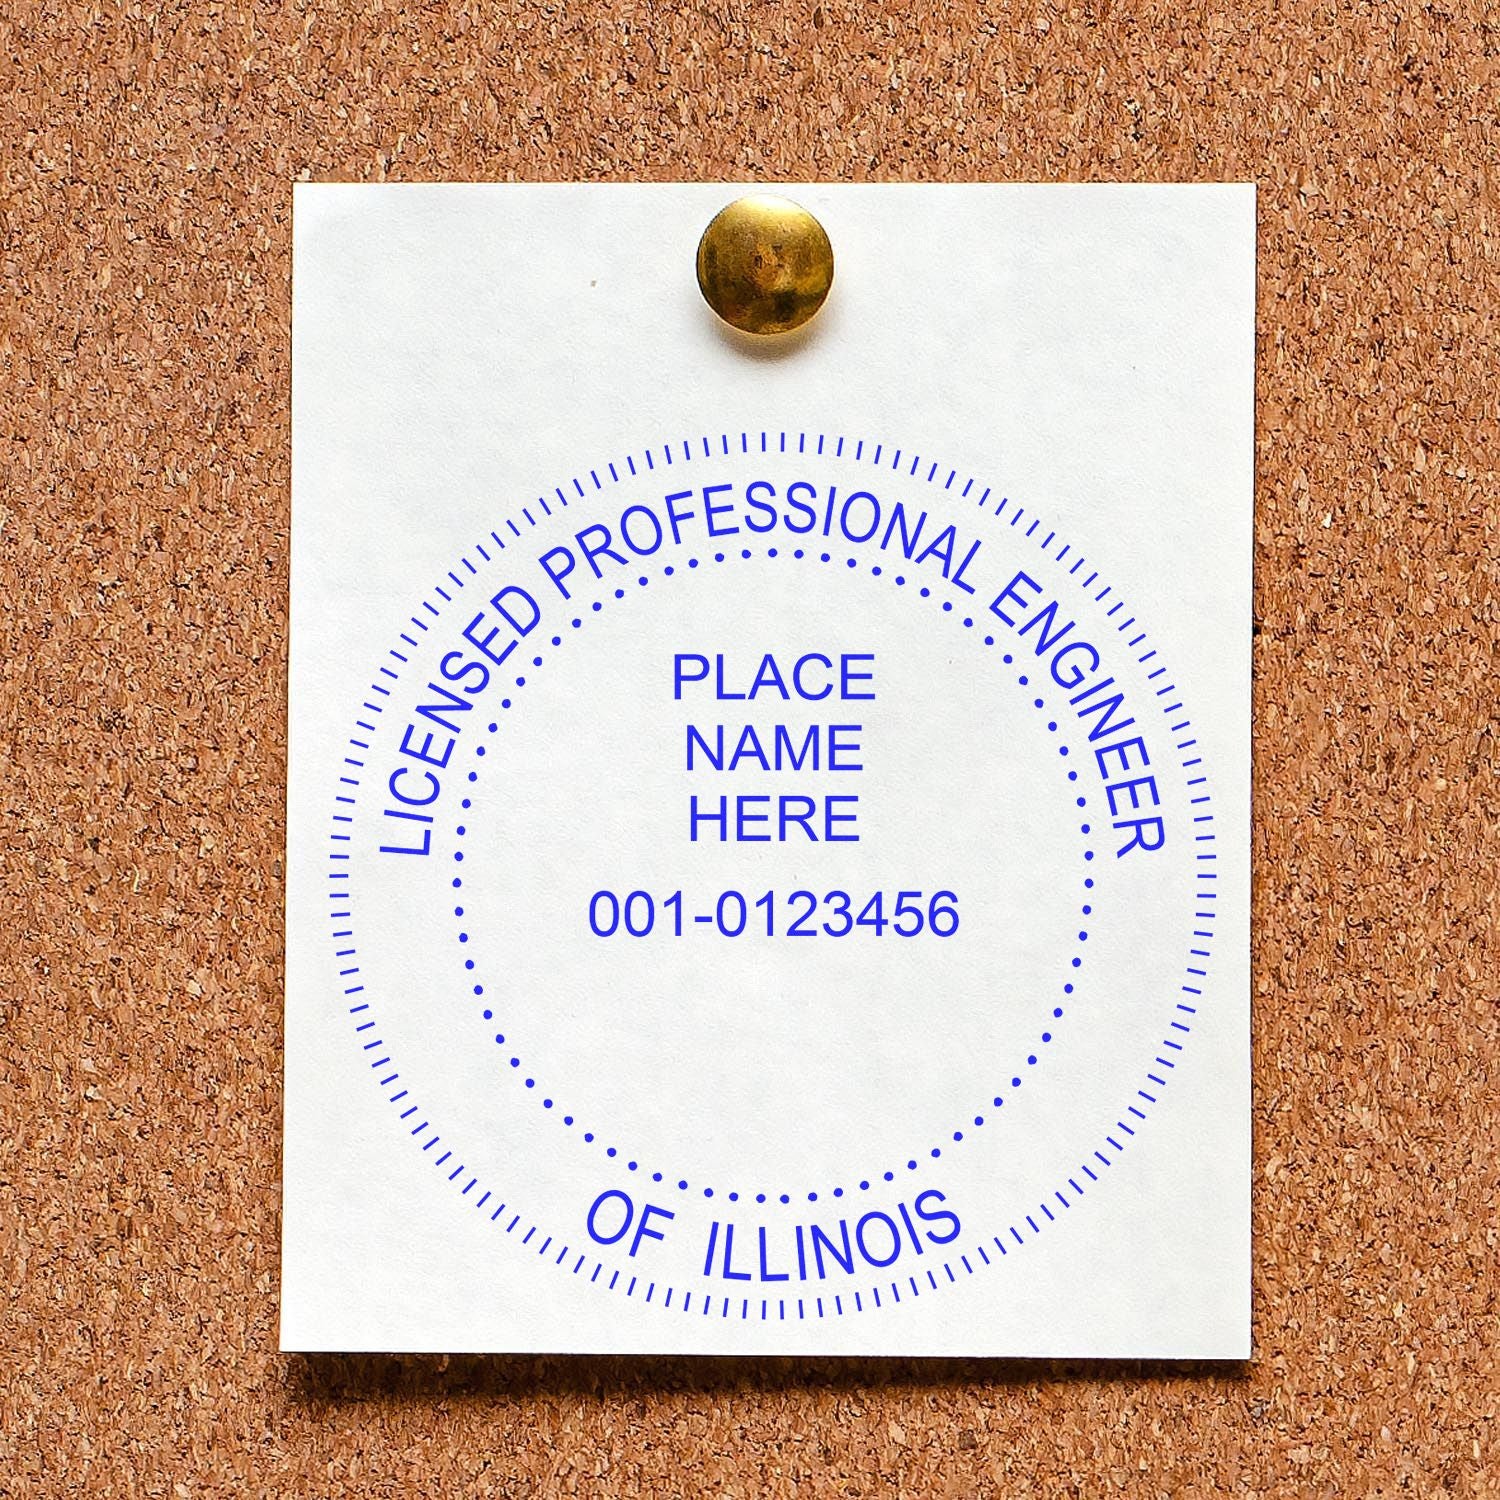 Navigating Illinois PE Stamp Regulations: What You Need to Know Feature Image